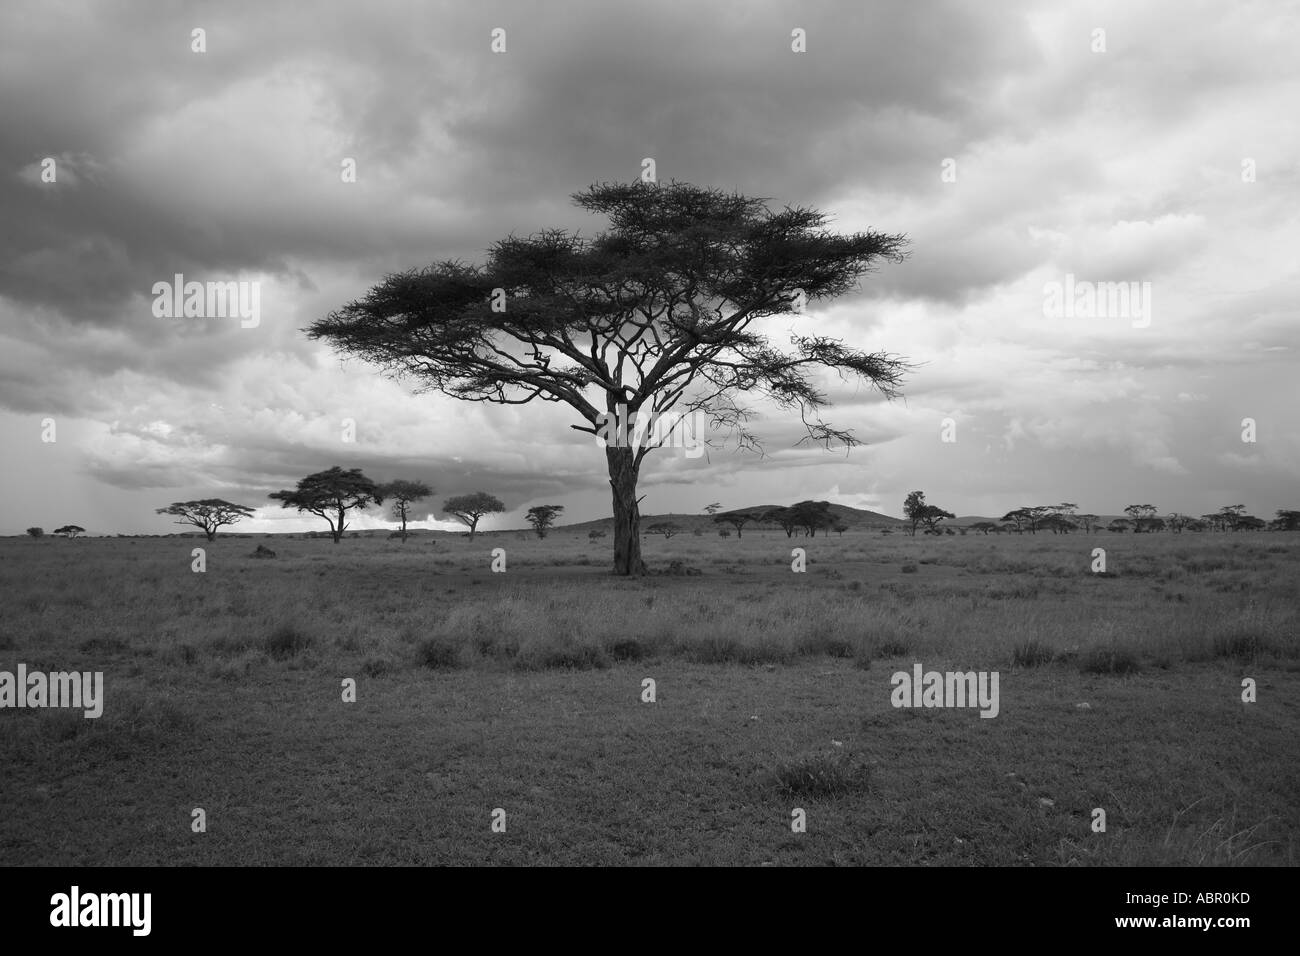 Lone Accacia tree in the African bush Stock Photo